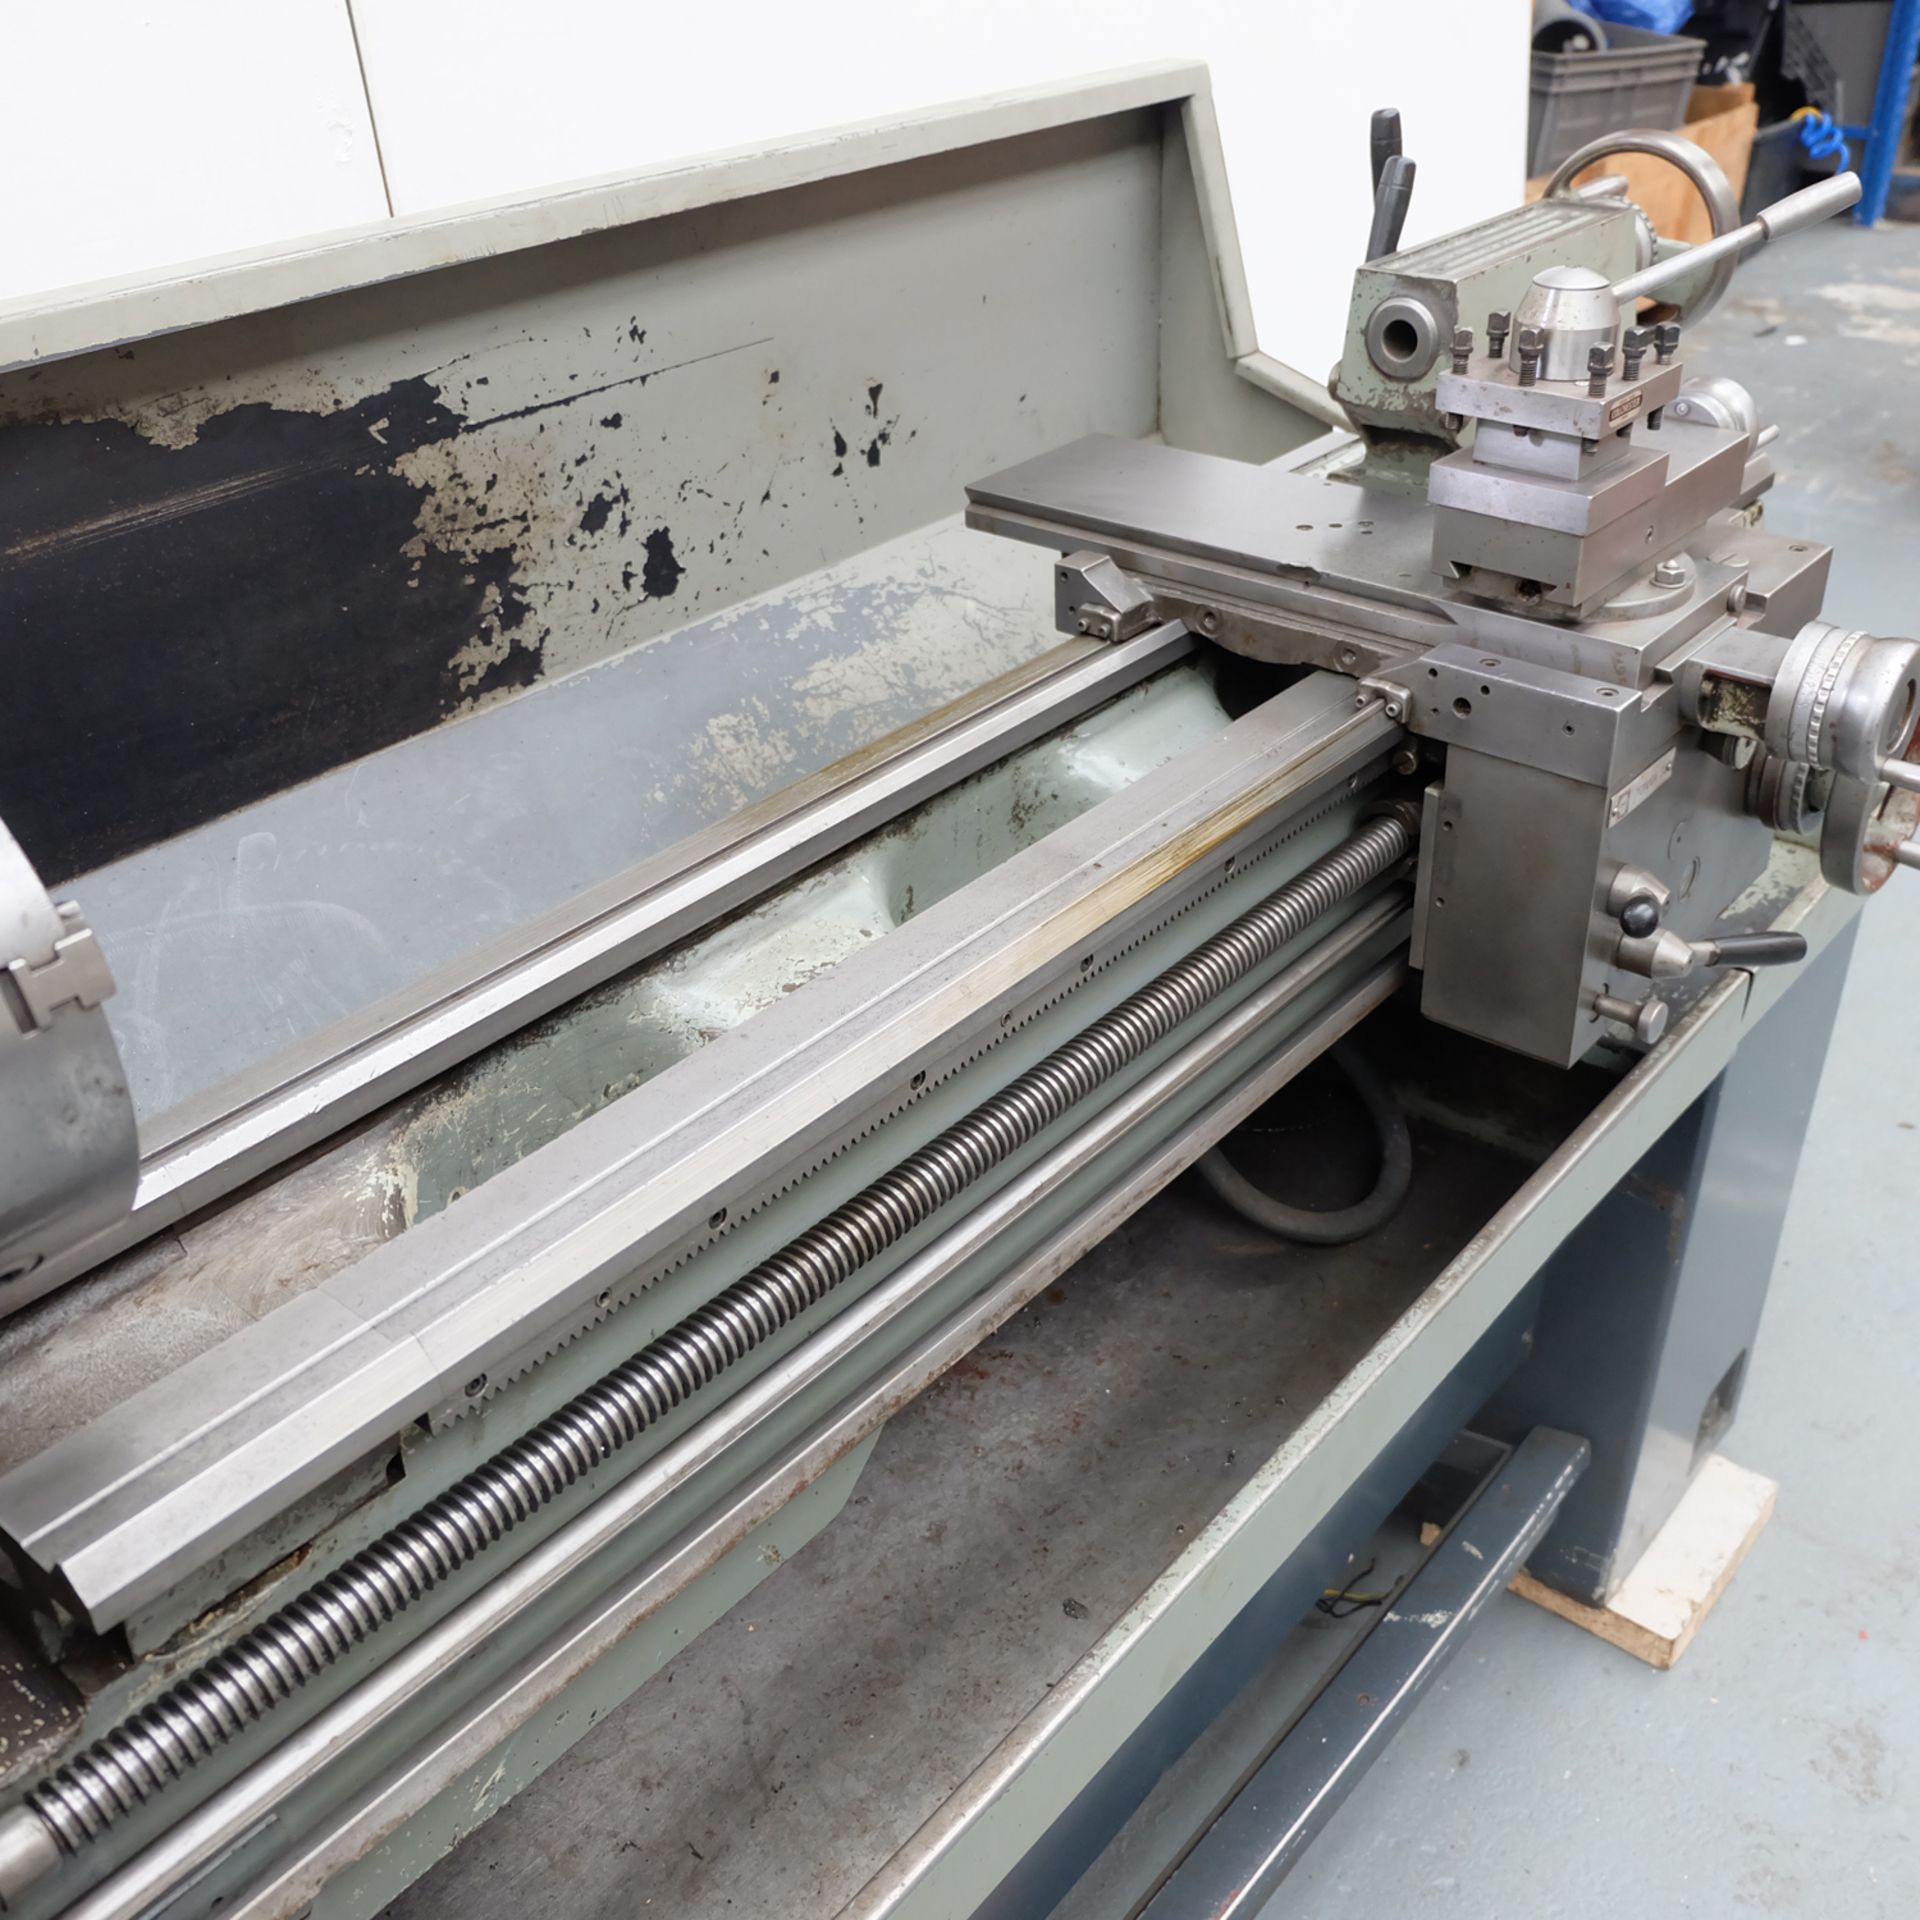 Colchester Master 2500 Gap Bed Centre Lathe. Height of Centres 6 1/2". Swing Over Bed 13 1/4". - Image 8 of 10